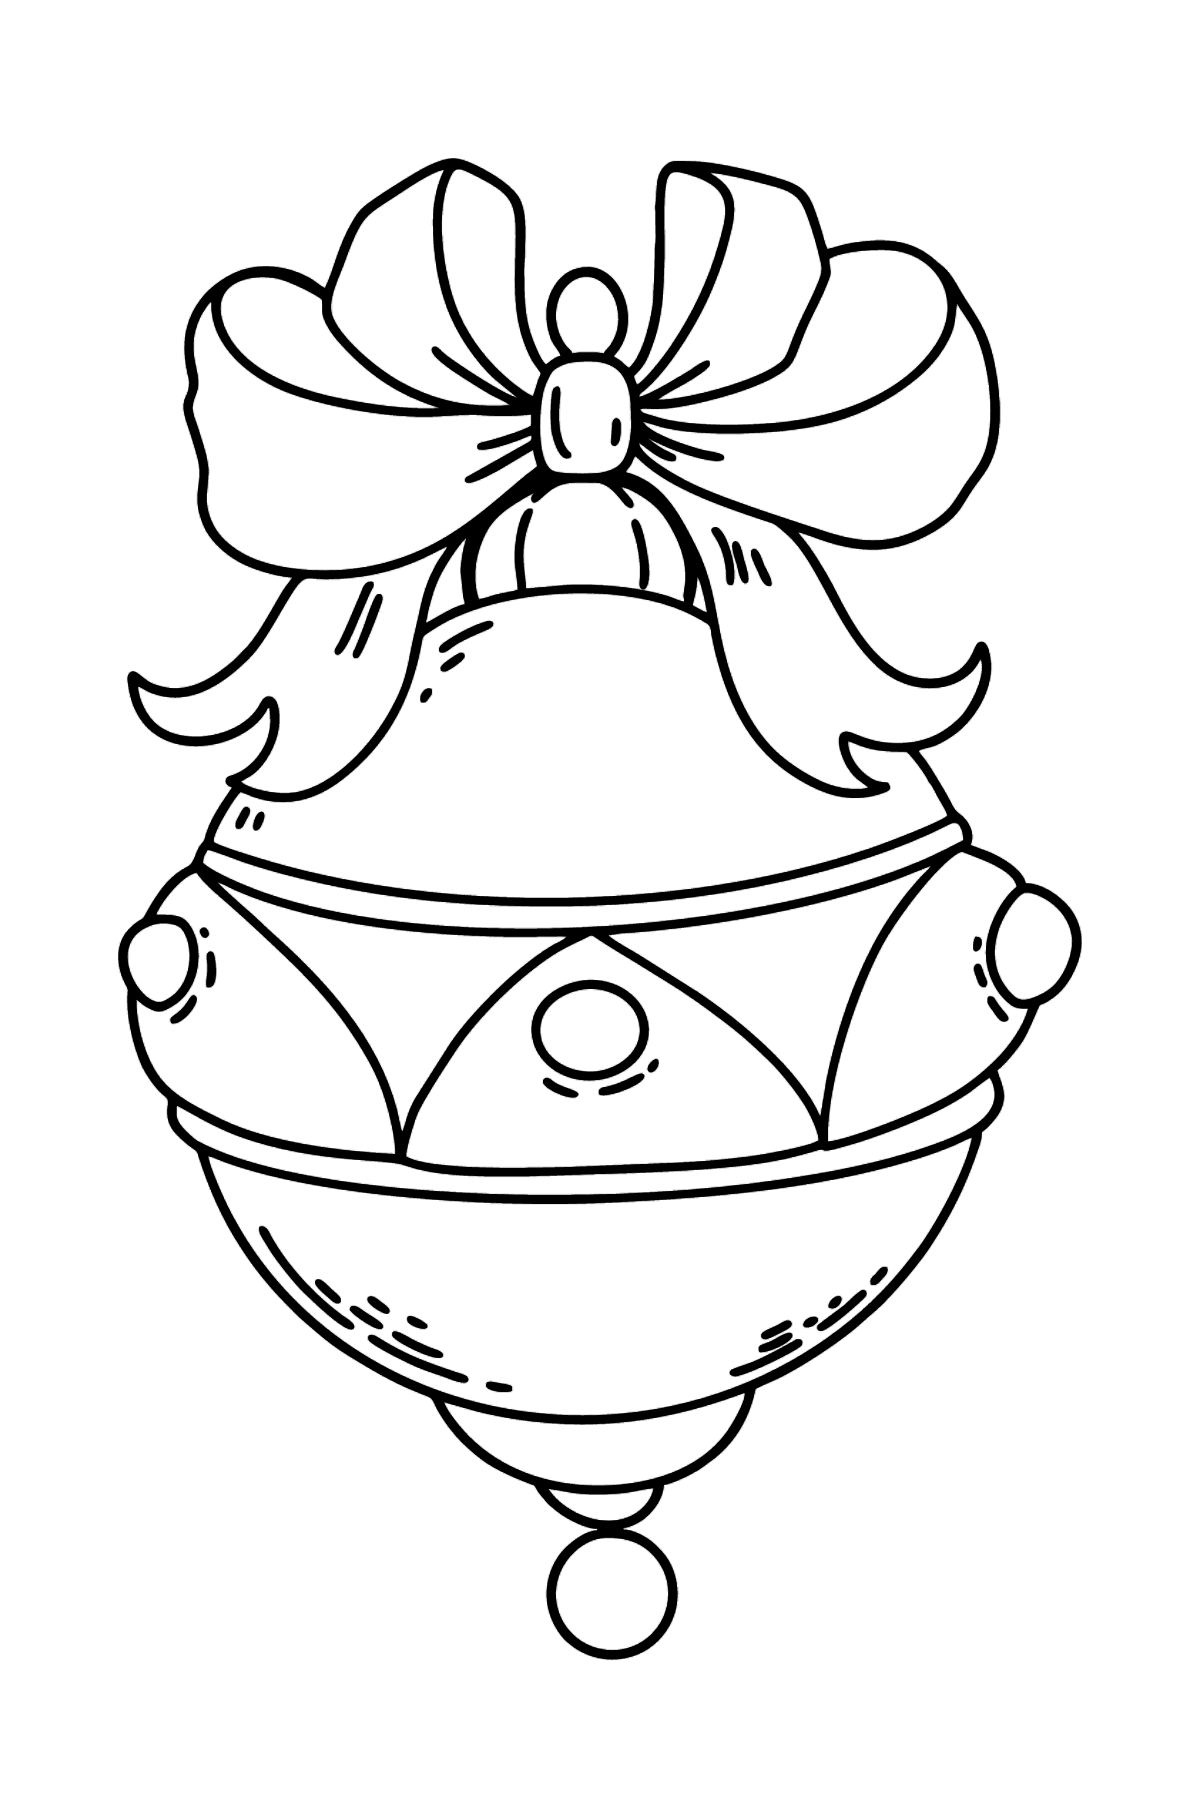 Christmas tree toy coloring page - Coloring Pages for Kids